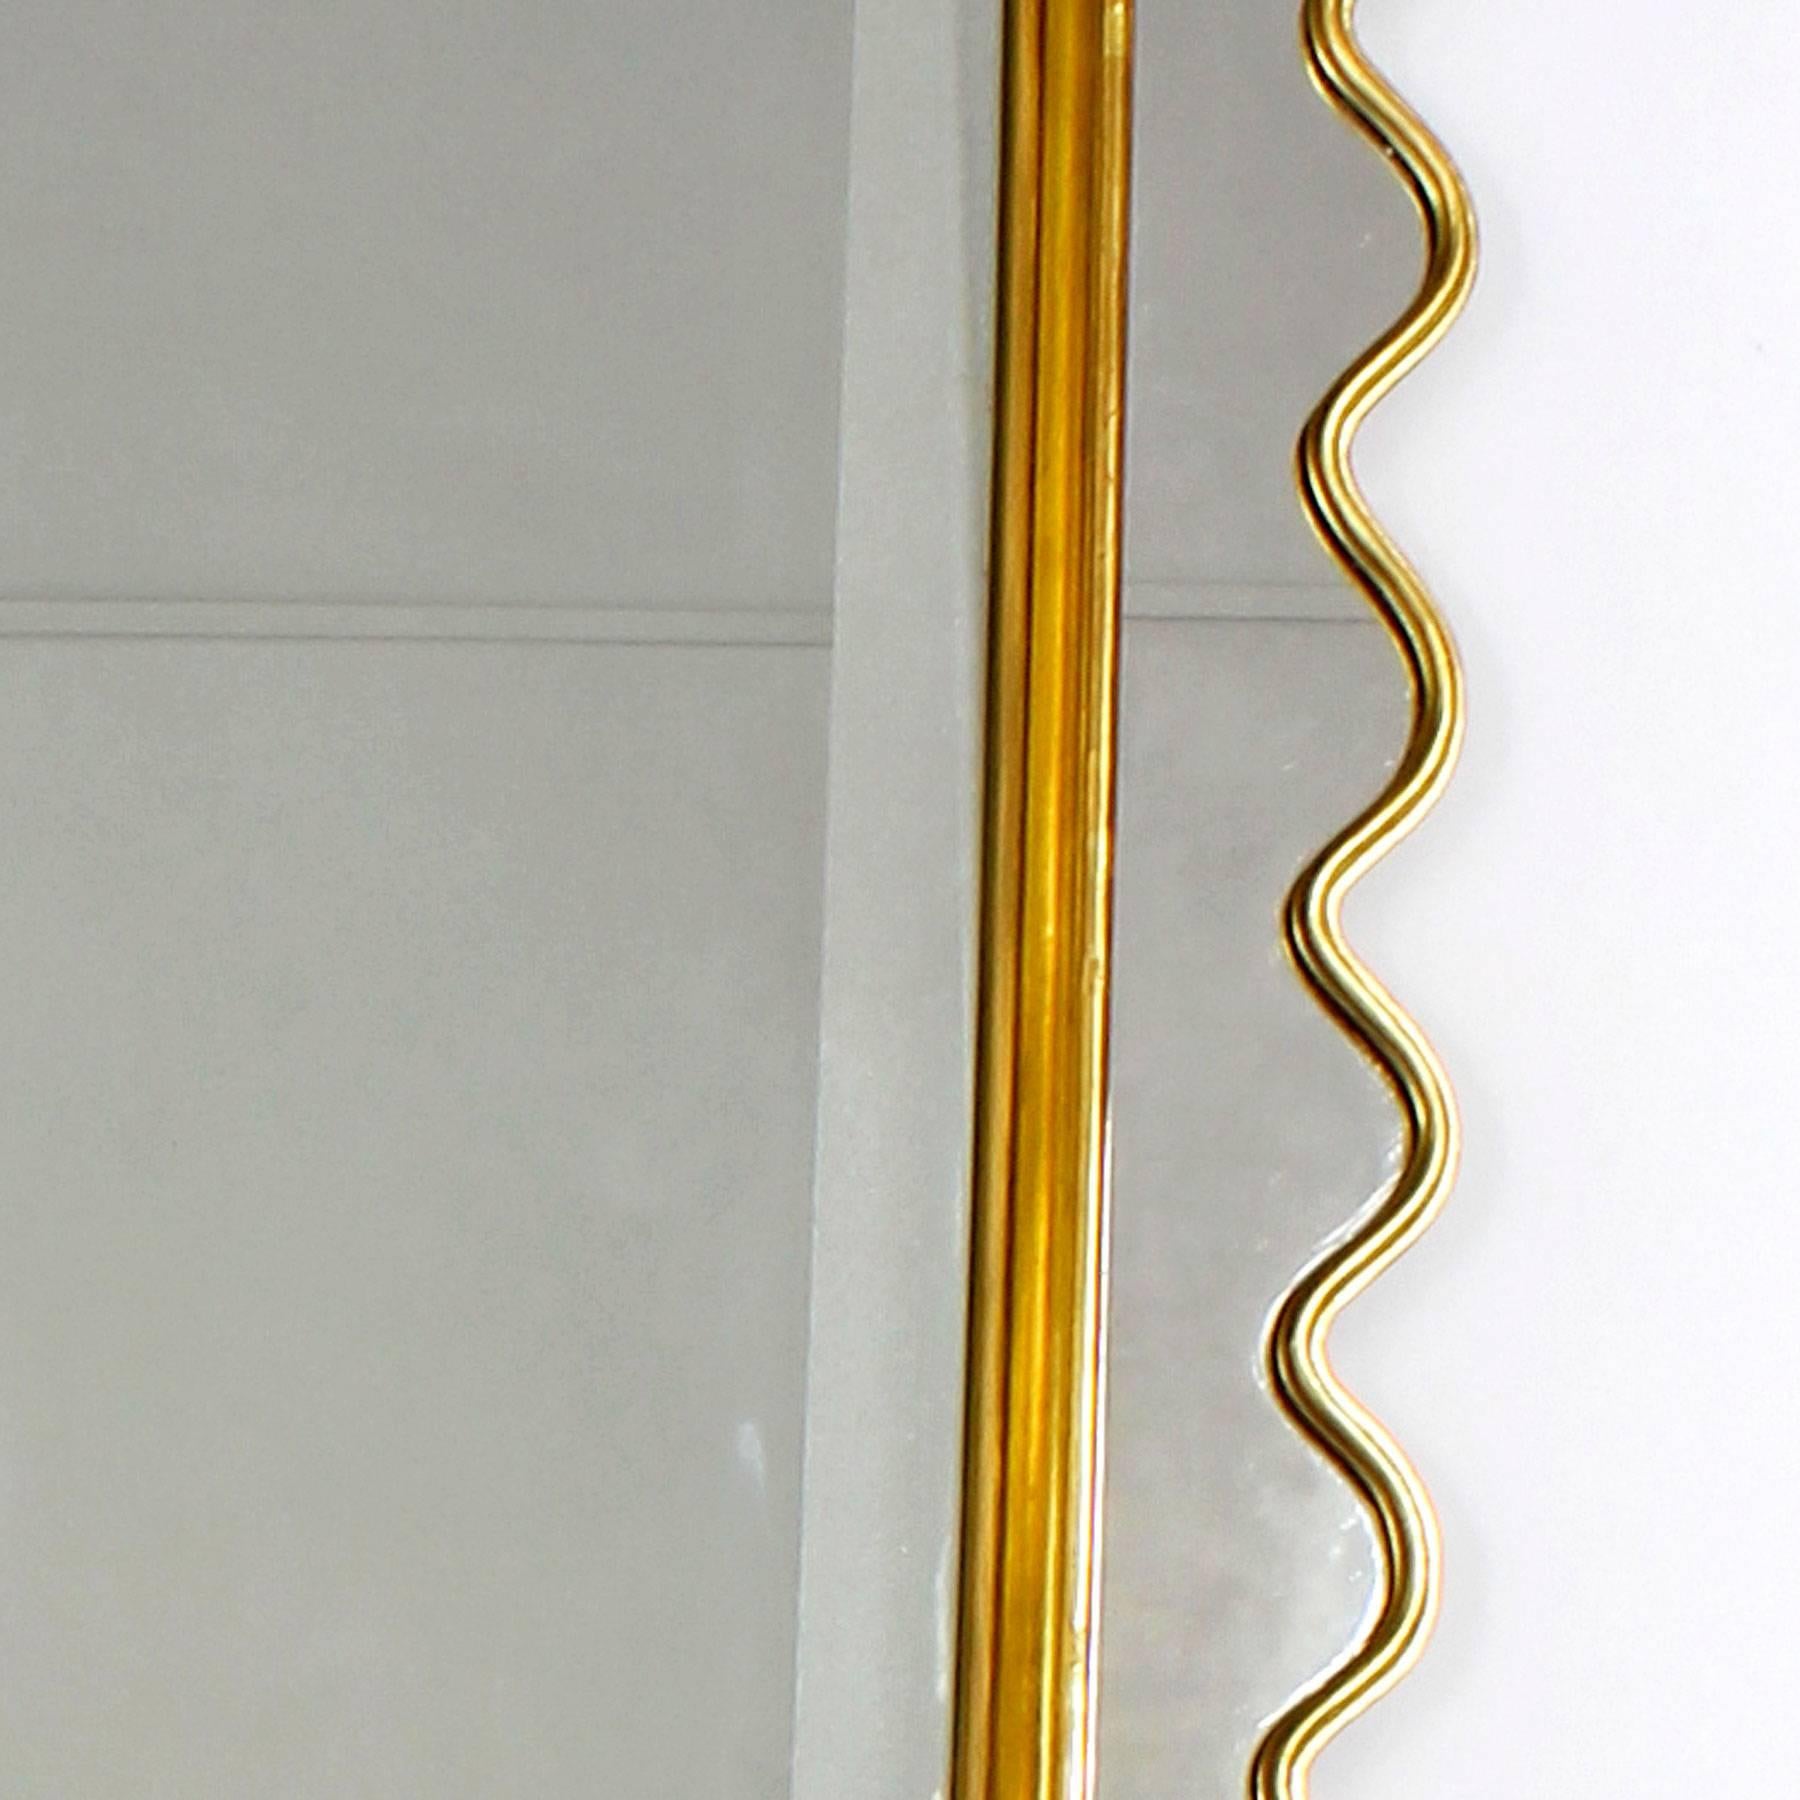 Italian 1940s Wall Mirror, Acid Etched Decoration, Golden Leaf Stucco Frame, Italy